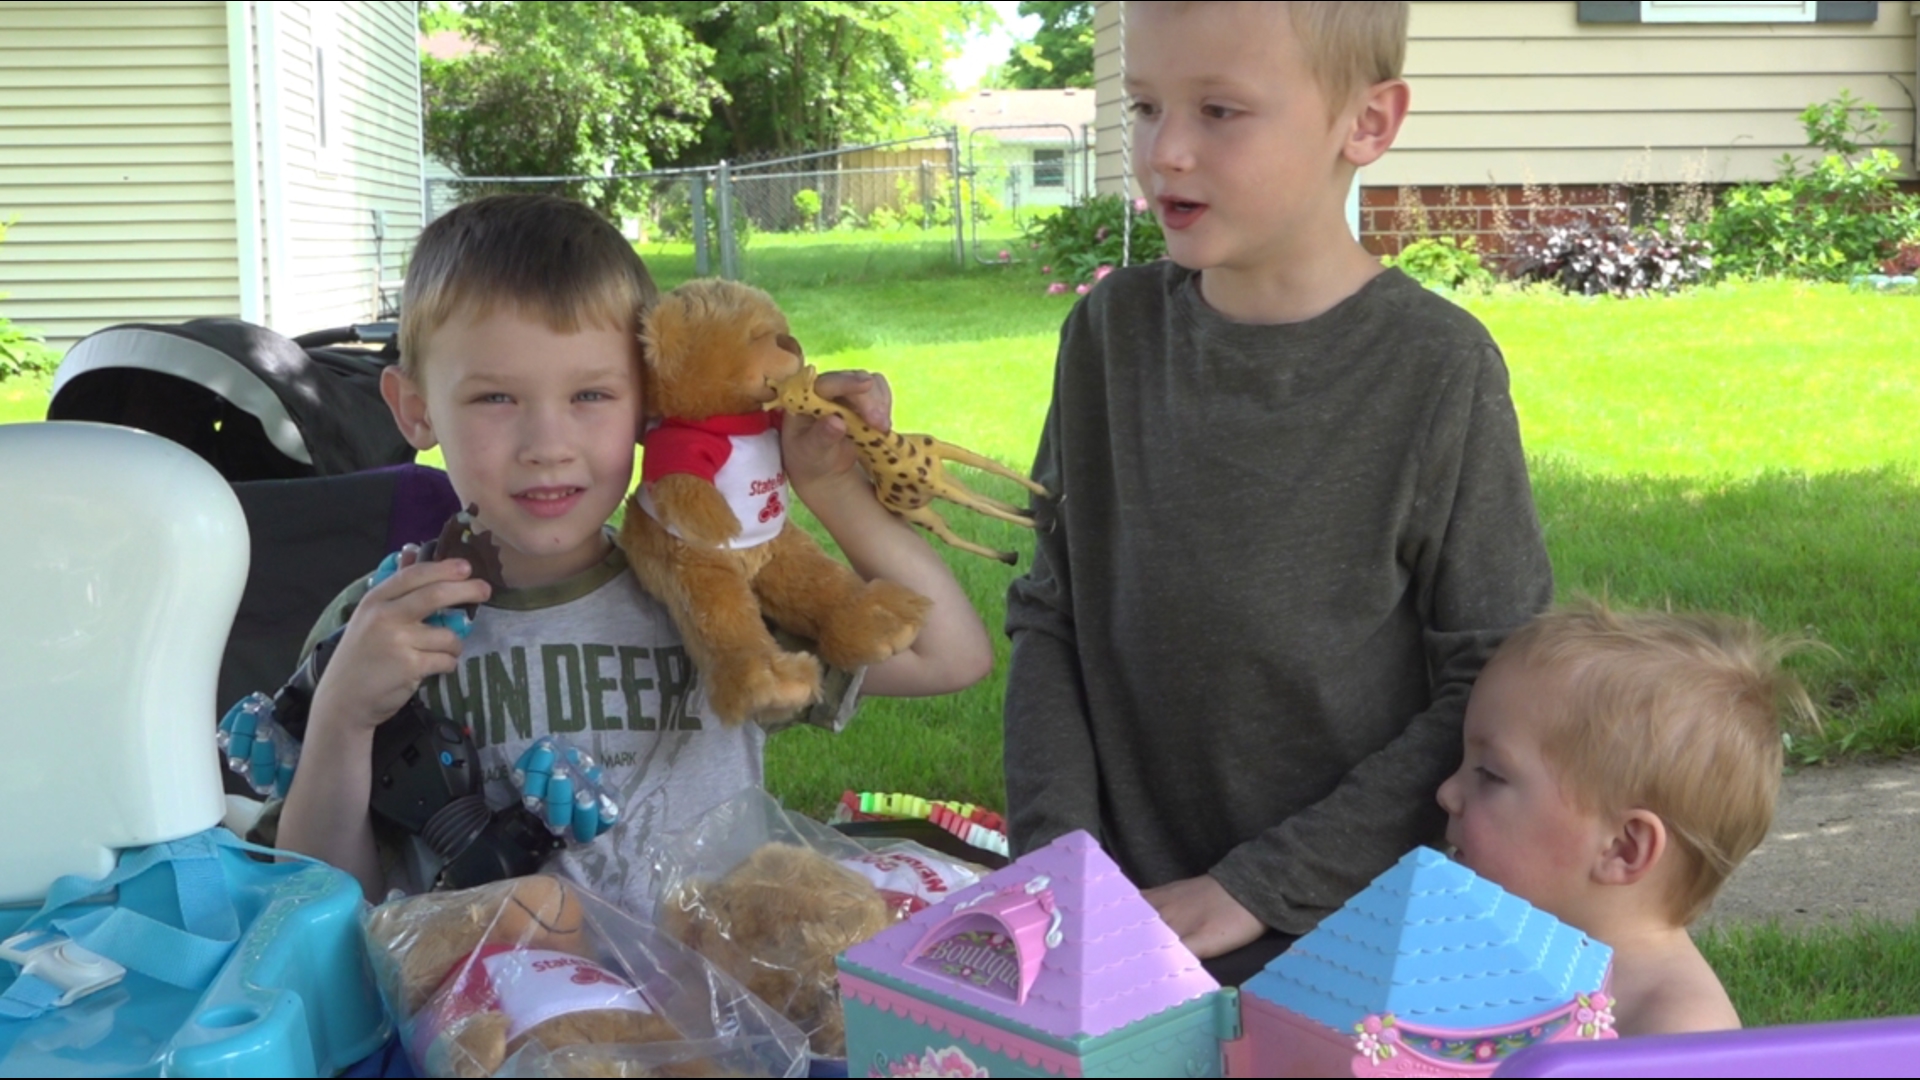 Evan Croxell heard about other kids losing their toys in the tornado, so he opened his toy chest in hopes of bringing smiles to others.